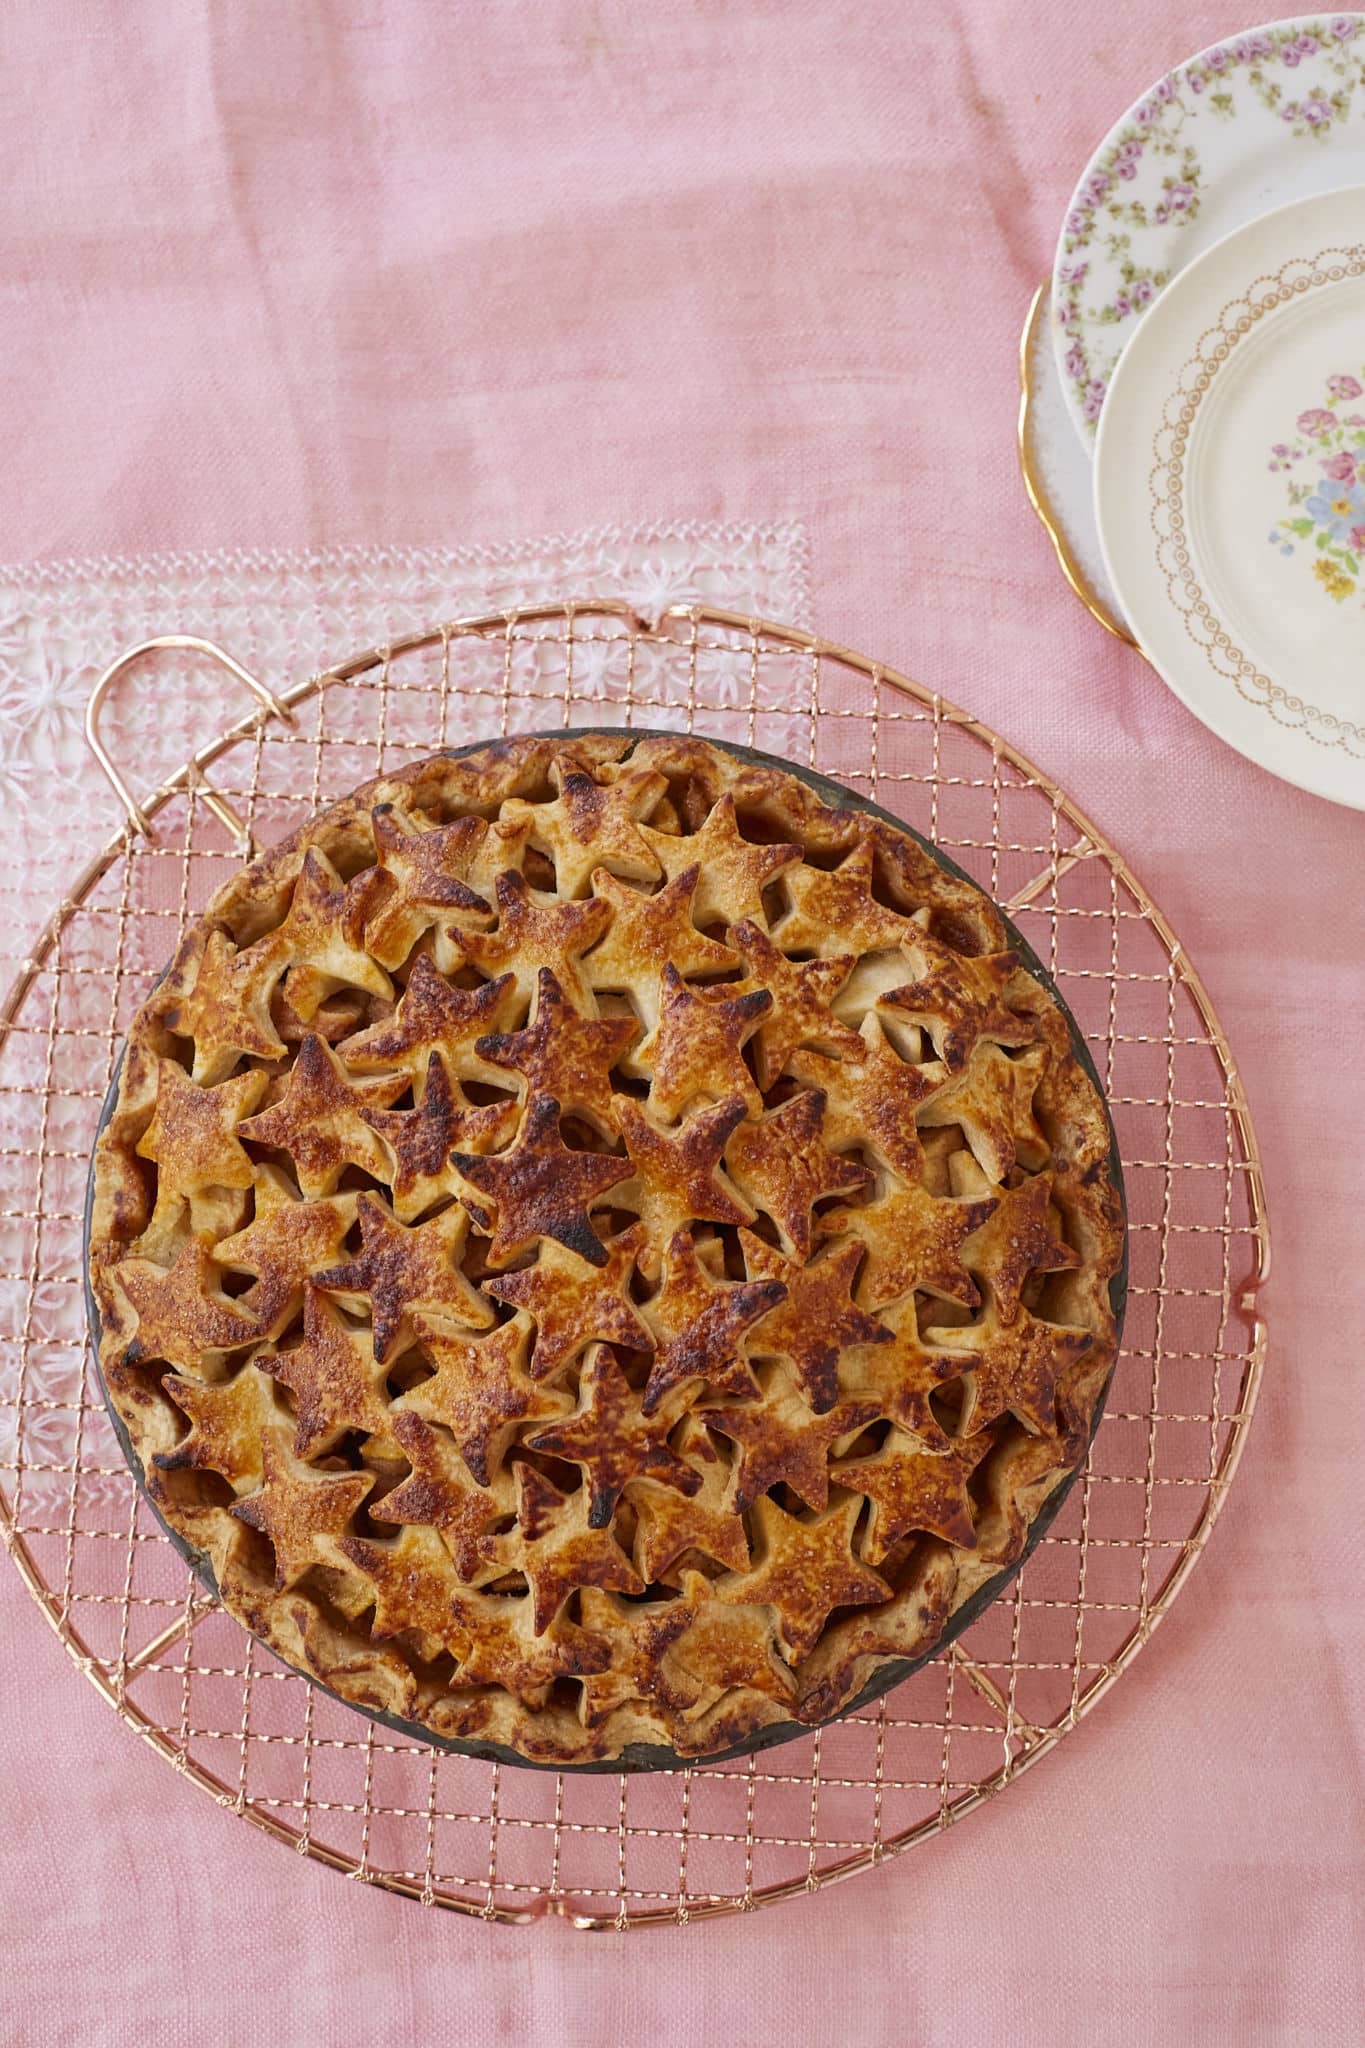 A photo of Butterscotch Pear Pie taken from above. The homemade pear pie is presented on a copper cooling rack on top of a pink table cloth. China dishes are stacked in the top right of the photo.